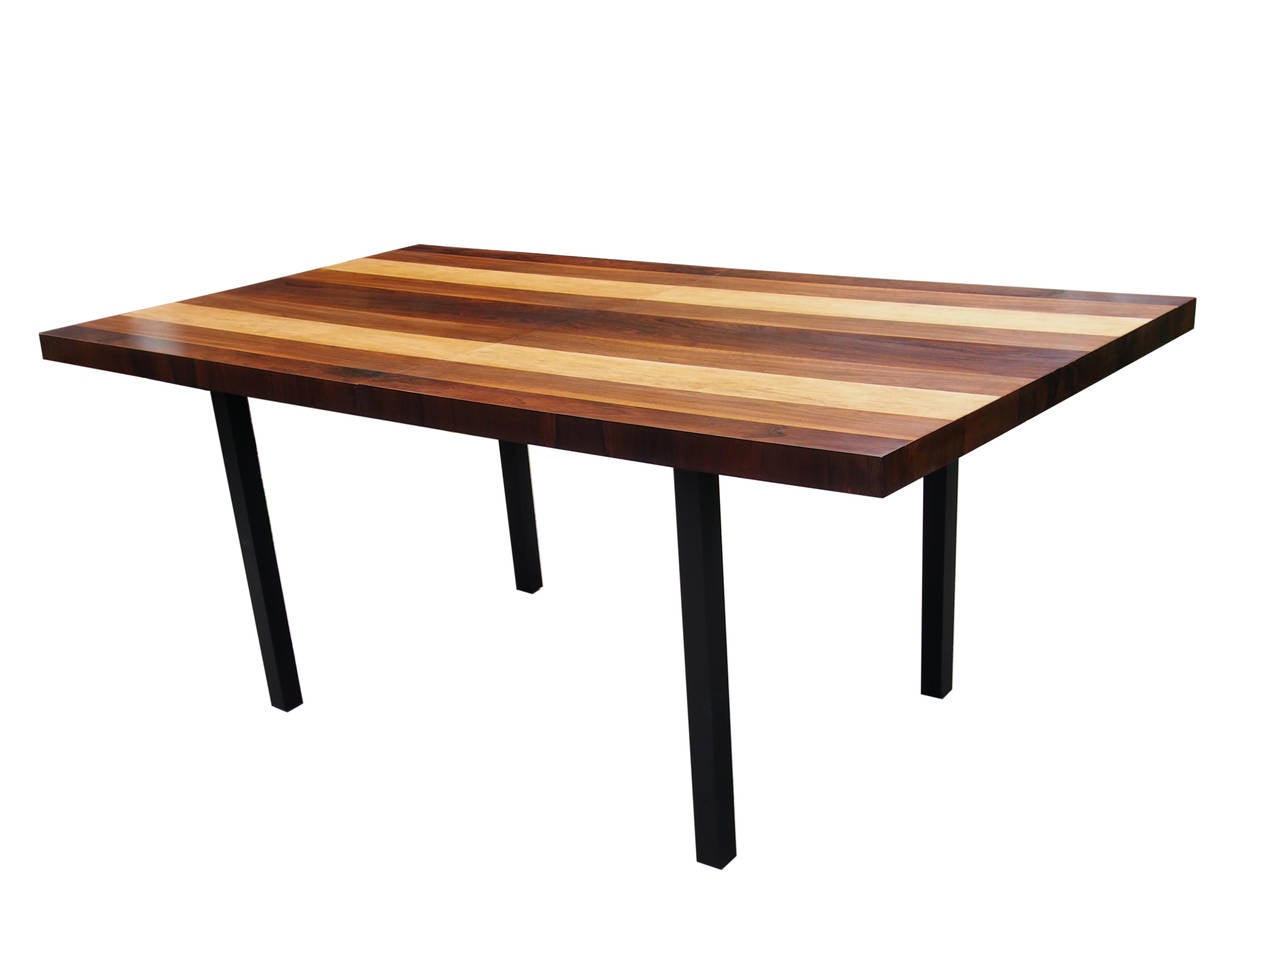 This stunning table was designed by Milo Baughman for Directional in the early 1960s. The top is made of rosewood, walnut and ash and the rectilinear base is ebonized wood. The design is modern and sleek, perfect for showcasing the juxtaposed woods.